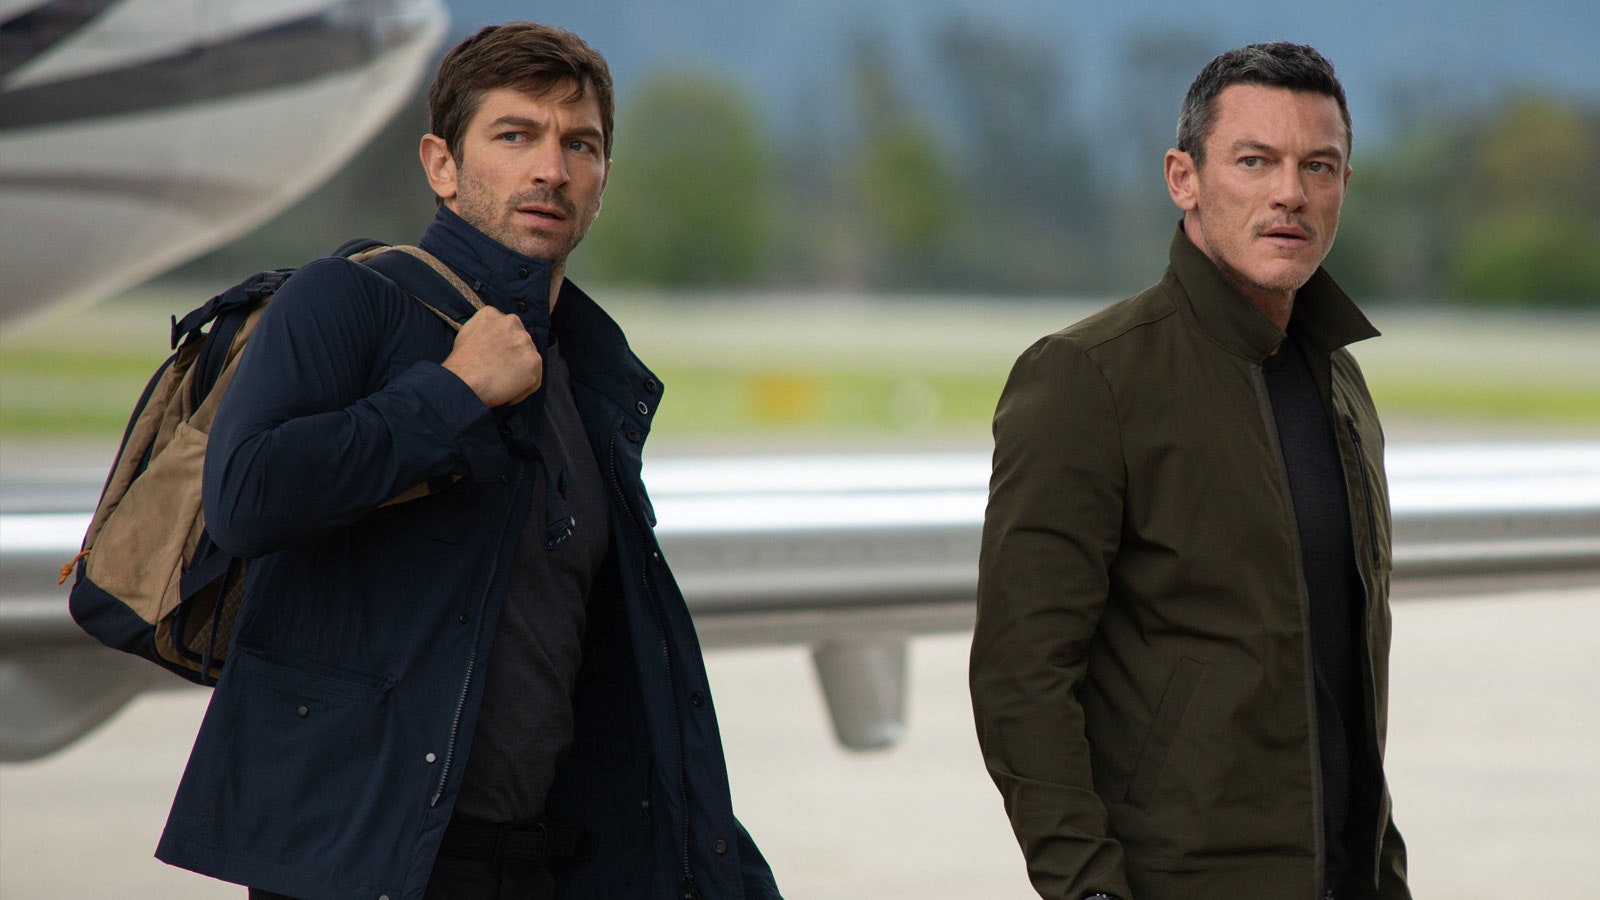 Michiel Huisman And Luke Evans Star In Apple TV+'s Action-Packed